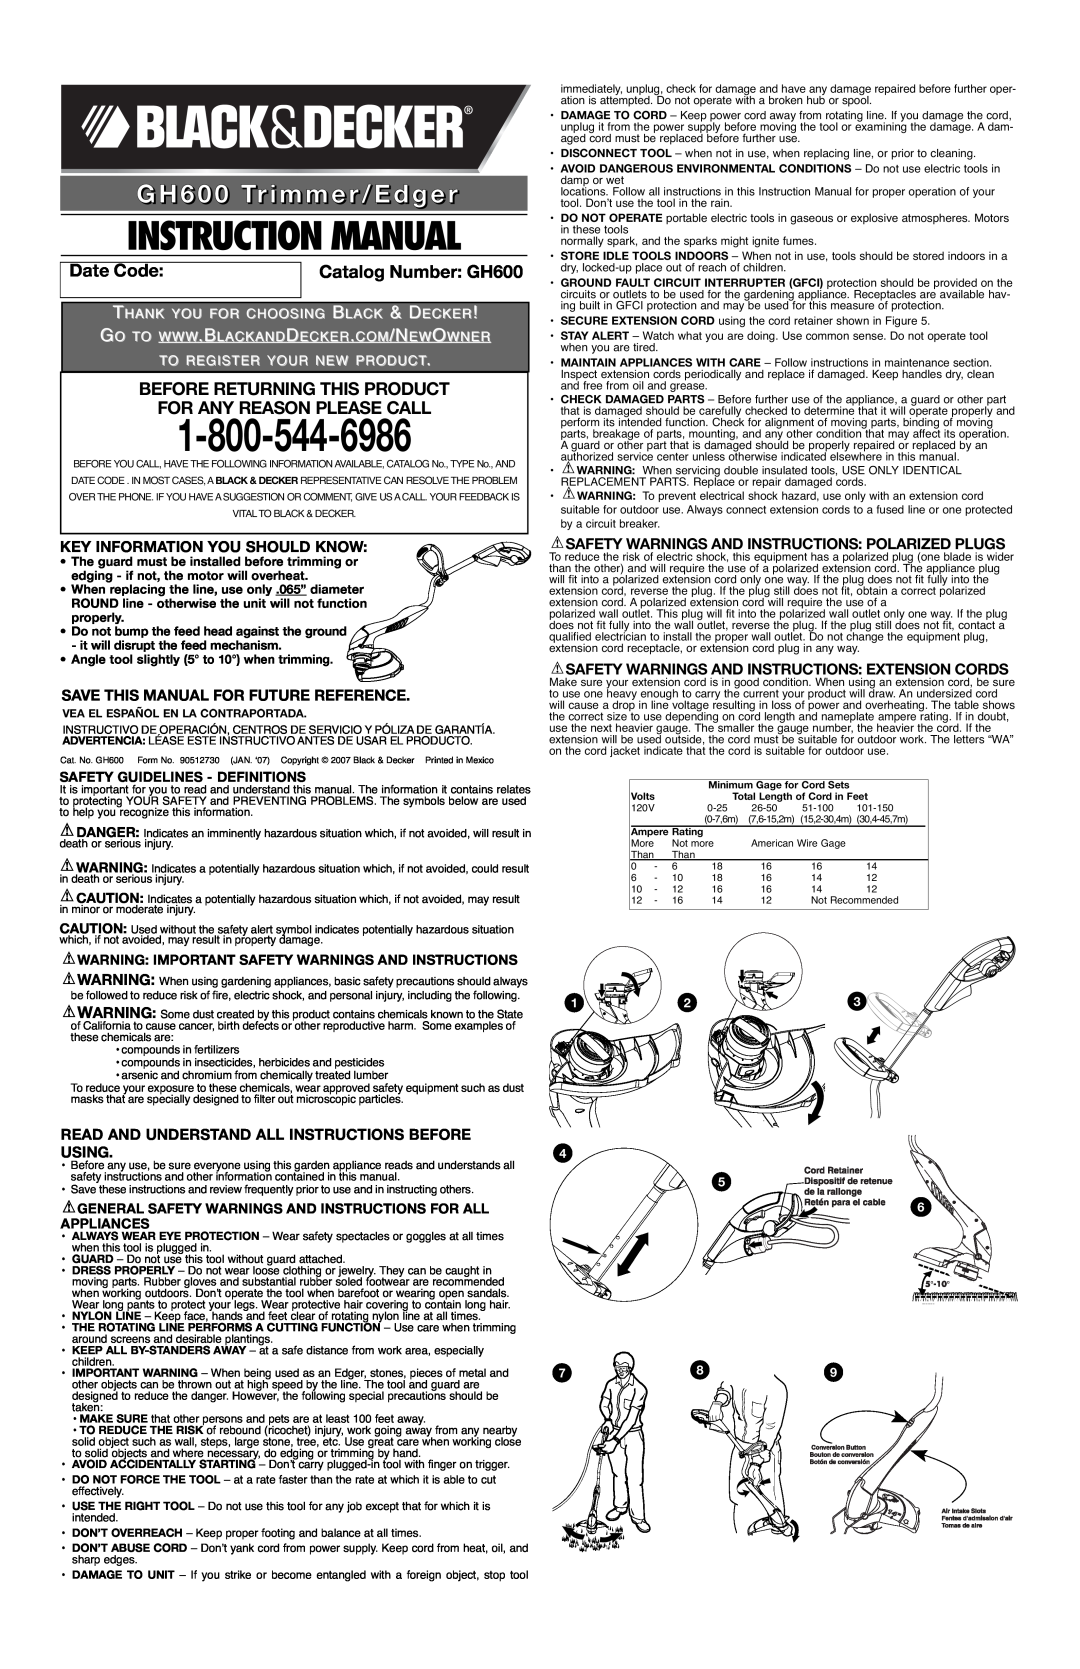 Black & Decker instruction manual Catalog Numbers GH600, ST7200, ST7201 Date Code, to register your new product, 4A5 